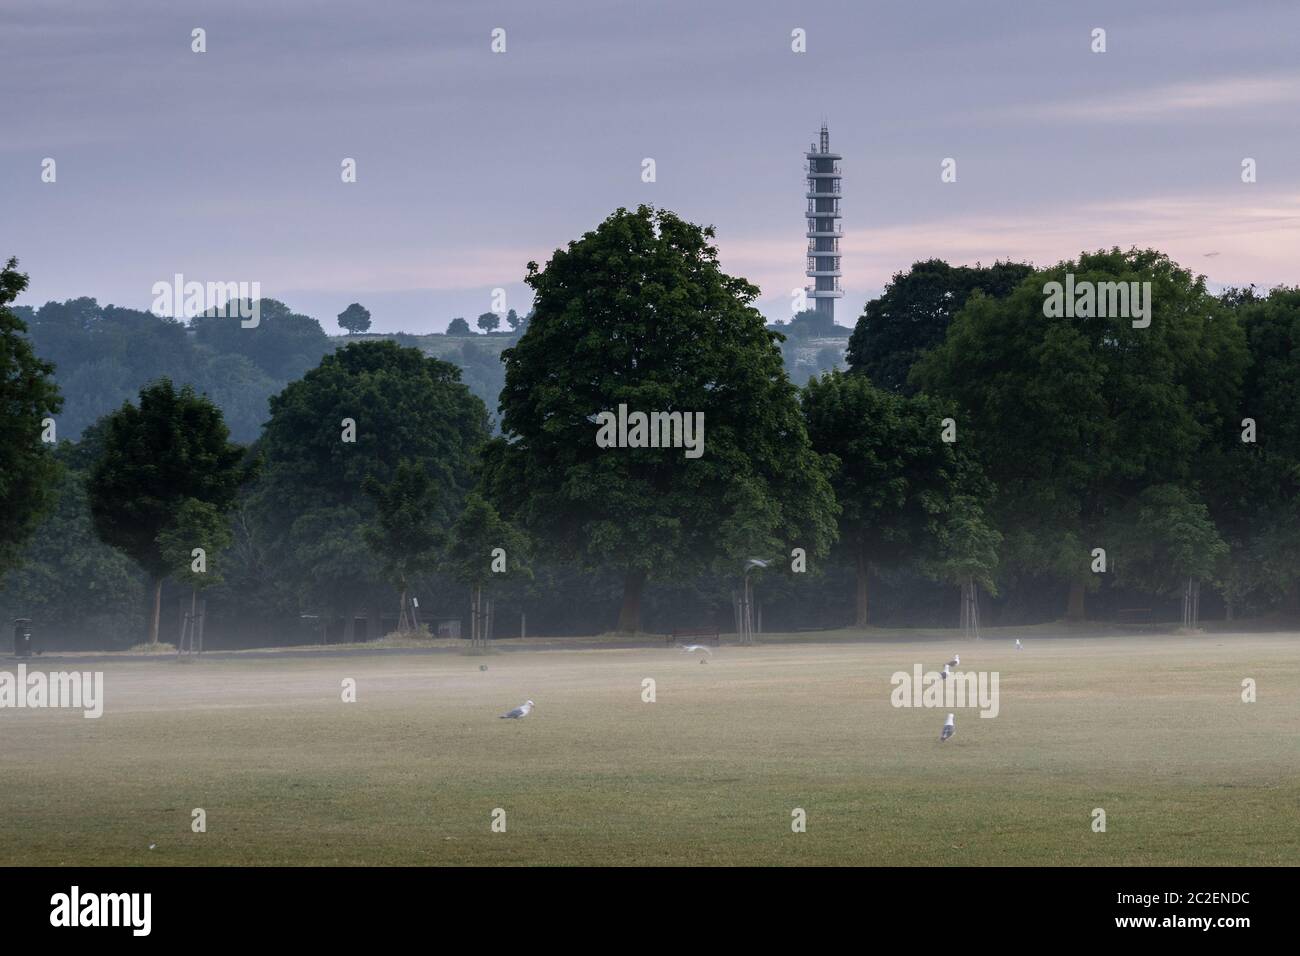 Mist rises from the playing field of Eastville Park at dawn in North Bristol, with the Purdown BT tower in the distance. Stock Photo